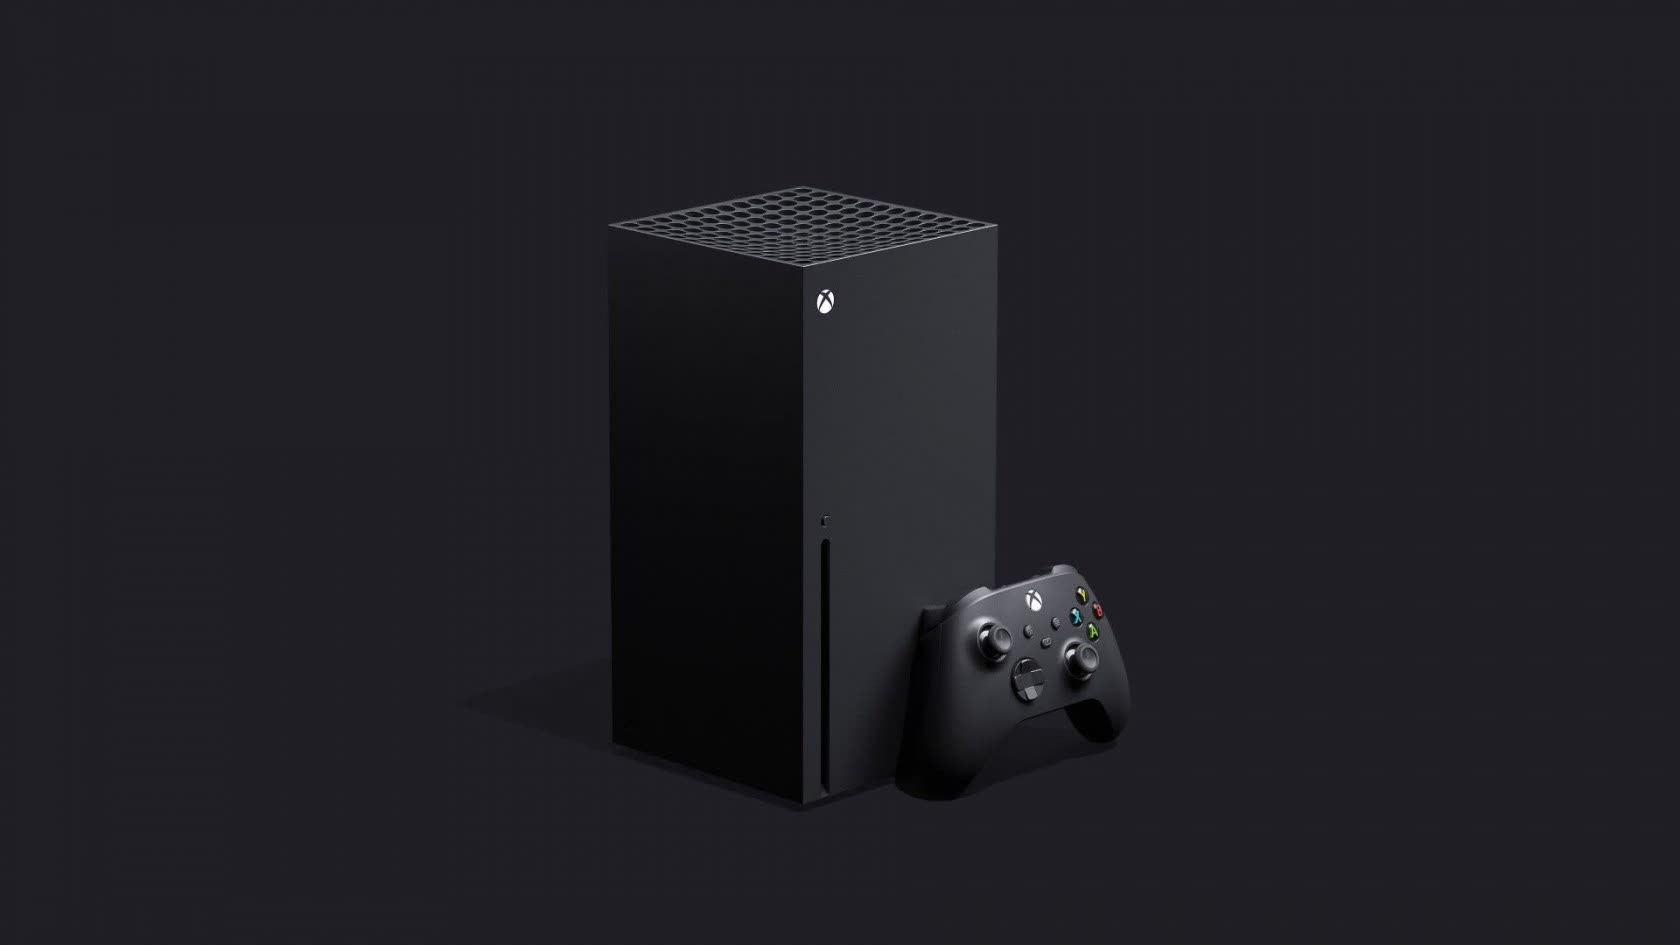 Microsoft's latest Xbox Series X demo shows off the console's full feature set